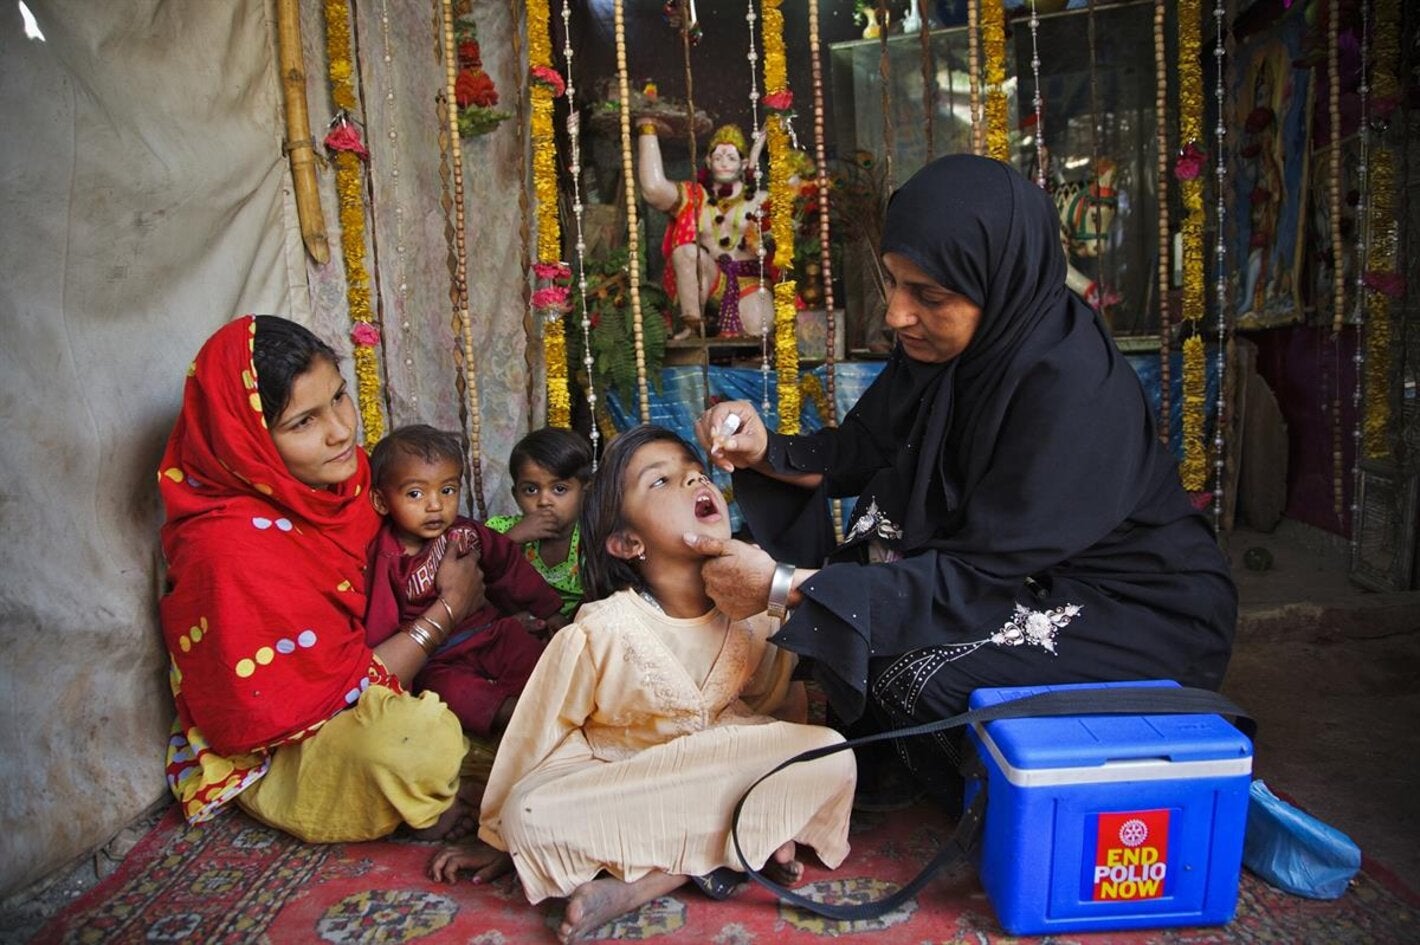 End of polio now